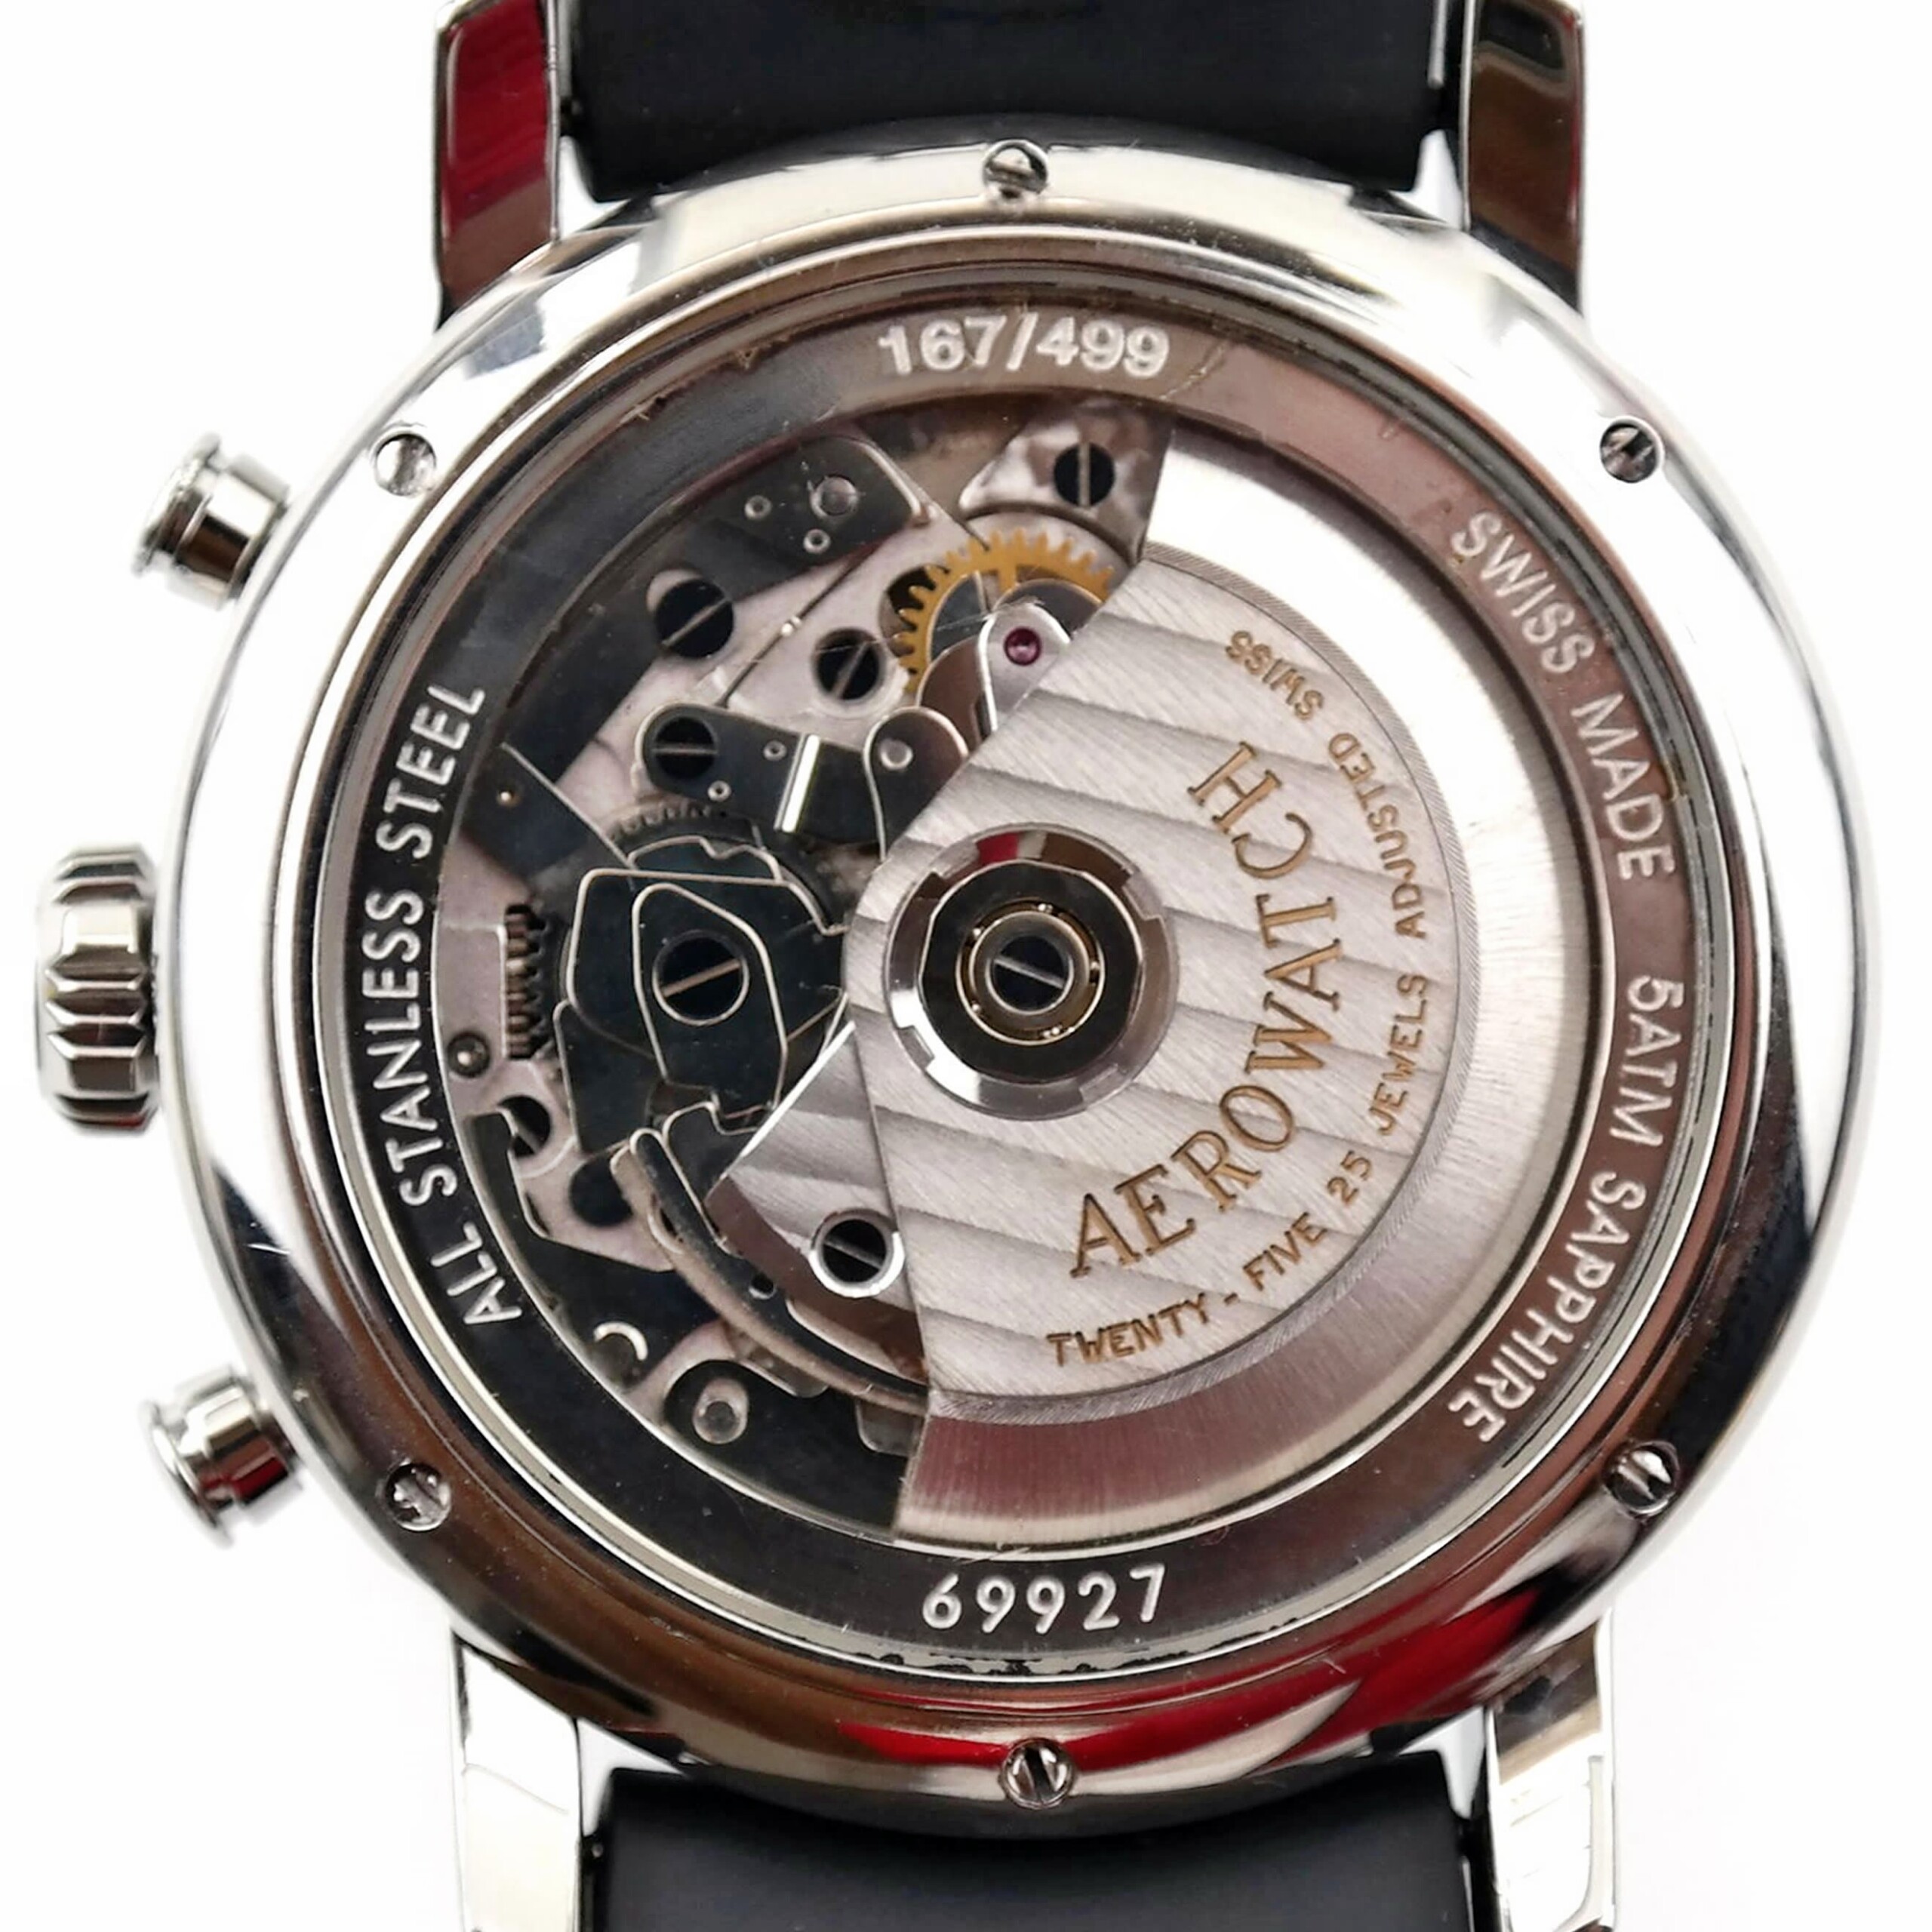 AEROWATCH - Renaissance - Cal. 7750 CCL3H Chronograph Moon-Phases Swiss Watch